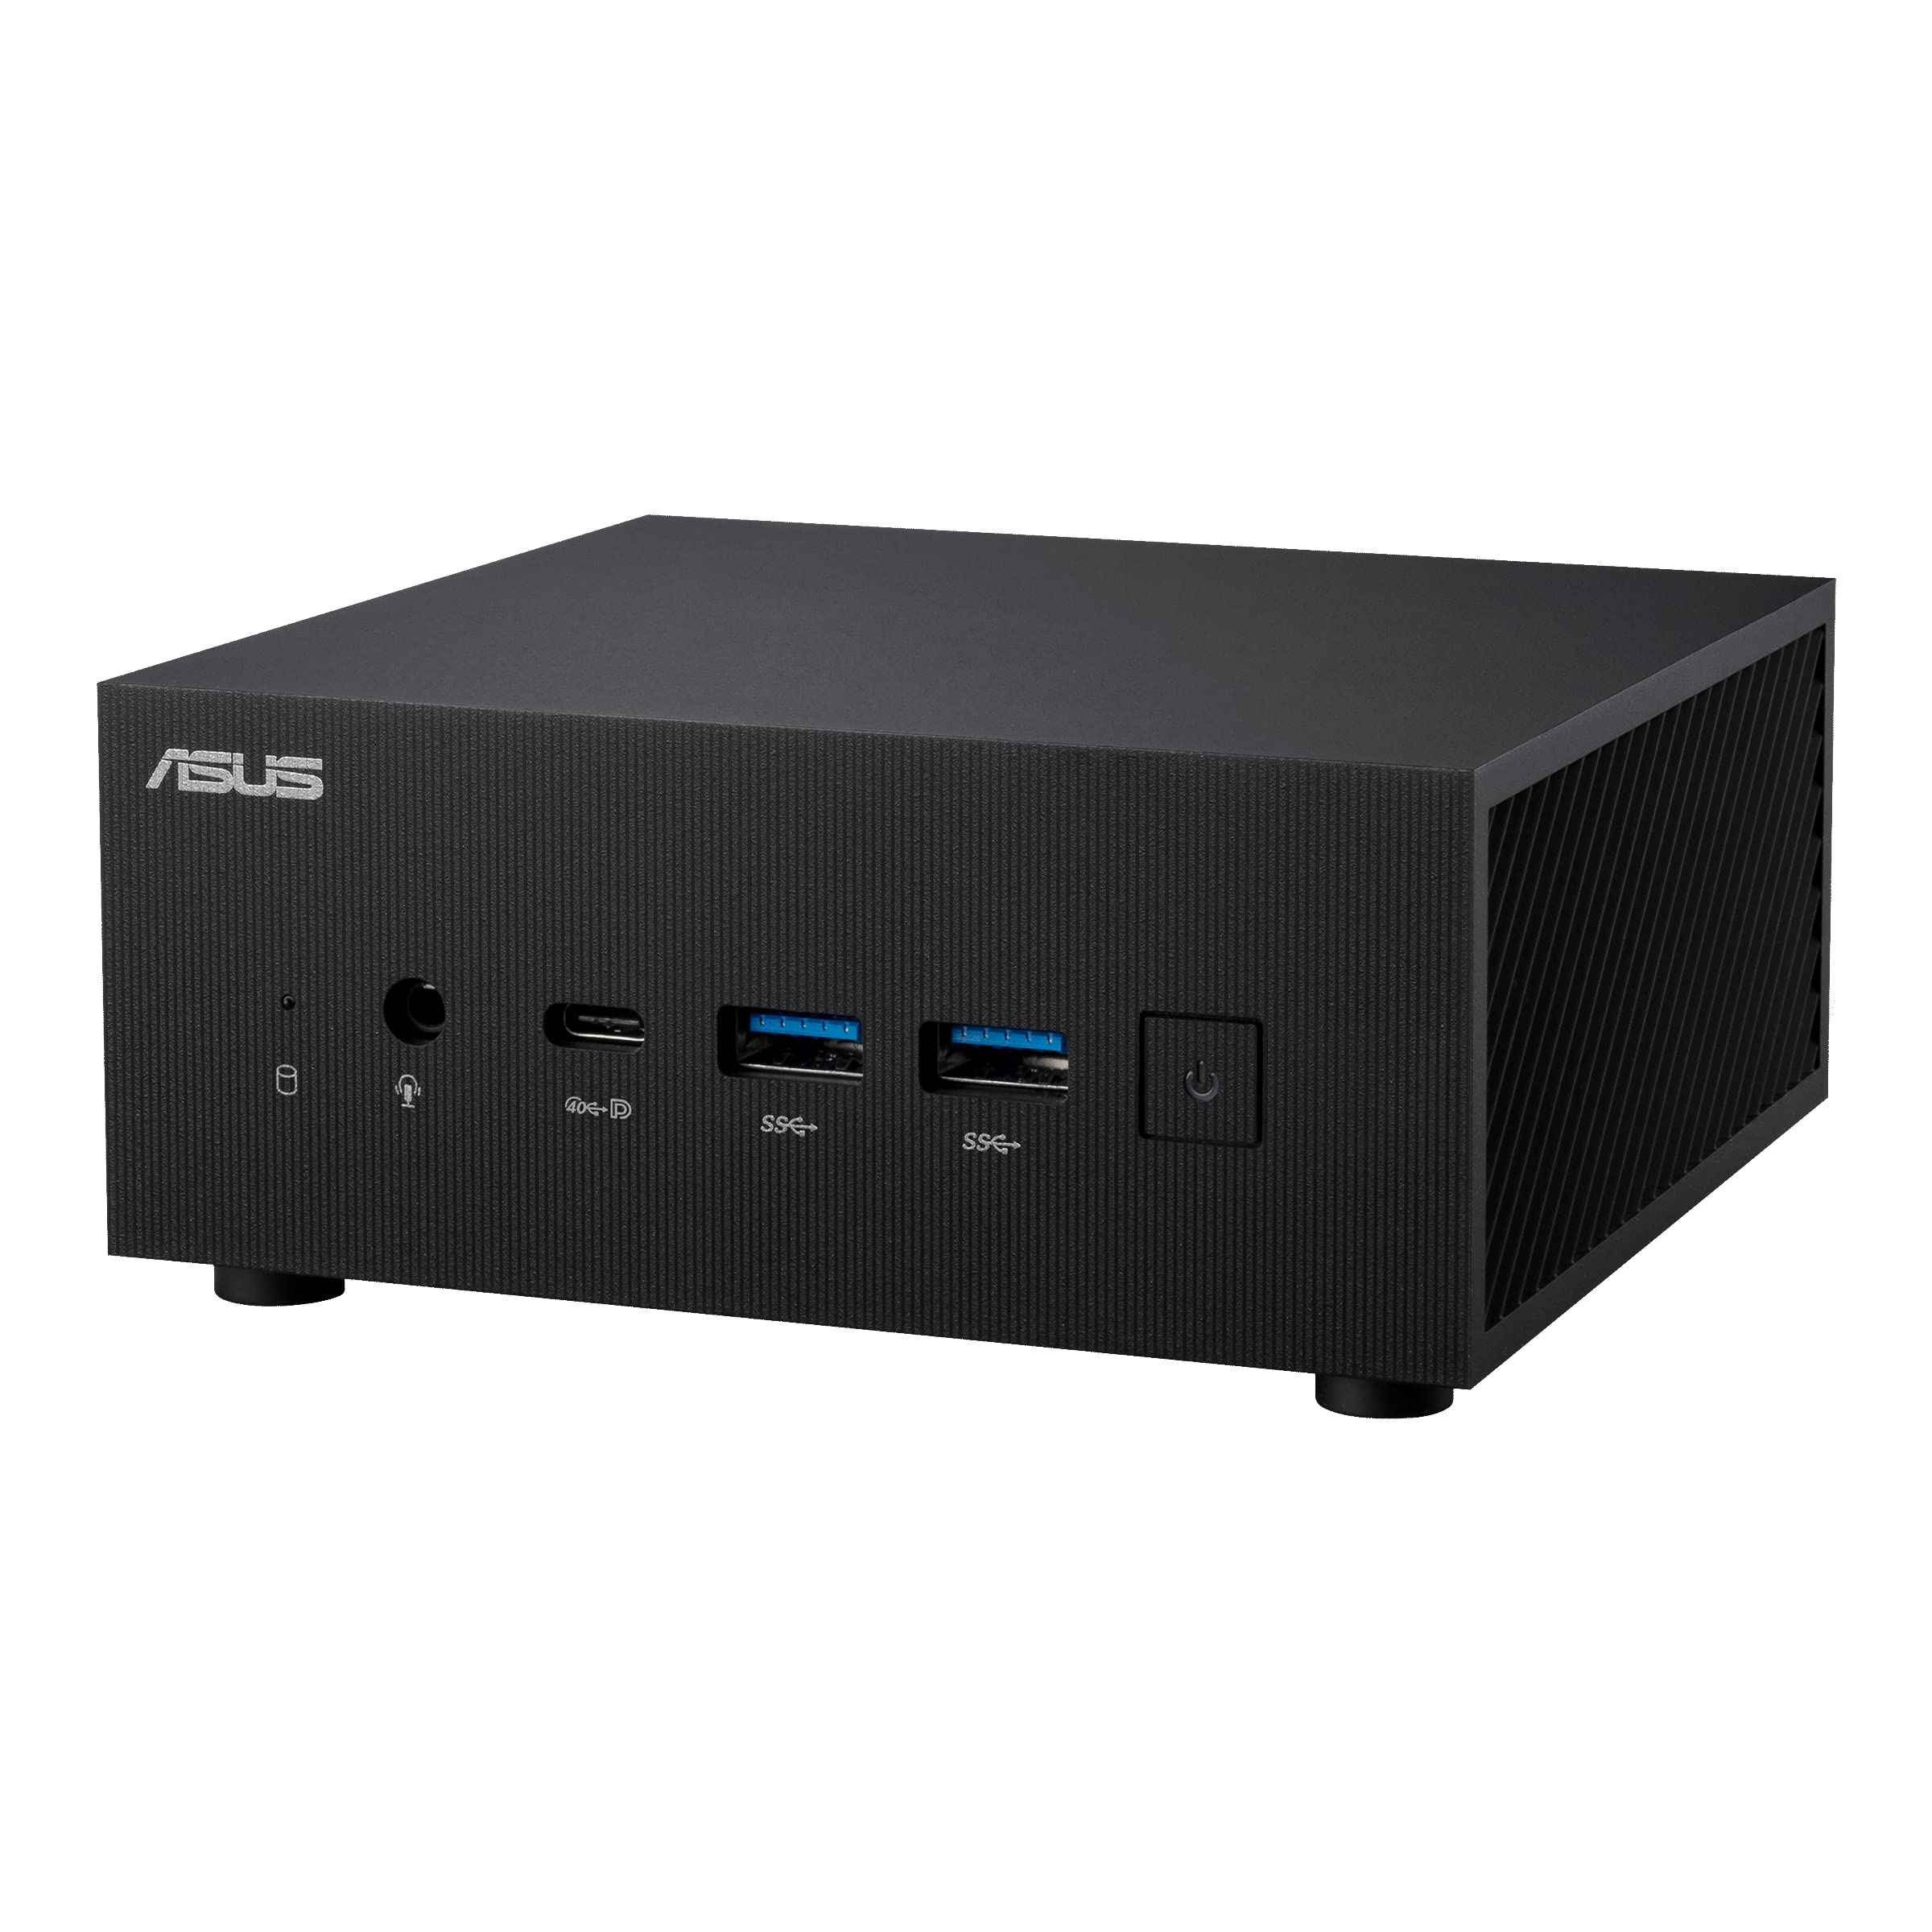 ASUS ExpertCenter PN53 Mini PC System with The Newest AMD Ryzen™ 5 7535HS Processor, Supports up to Four 4K-displays, 8GB DDR5 RAM, M.2 PCIE G4 256GB SSD, WiFi 6E, Bluetooth, 7 x USB, Windows 11 Pro